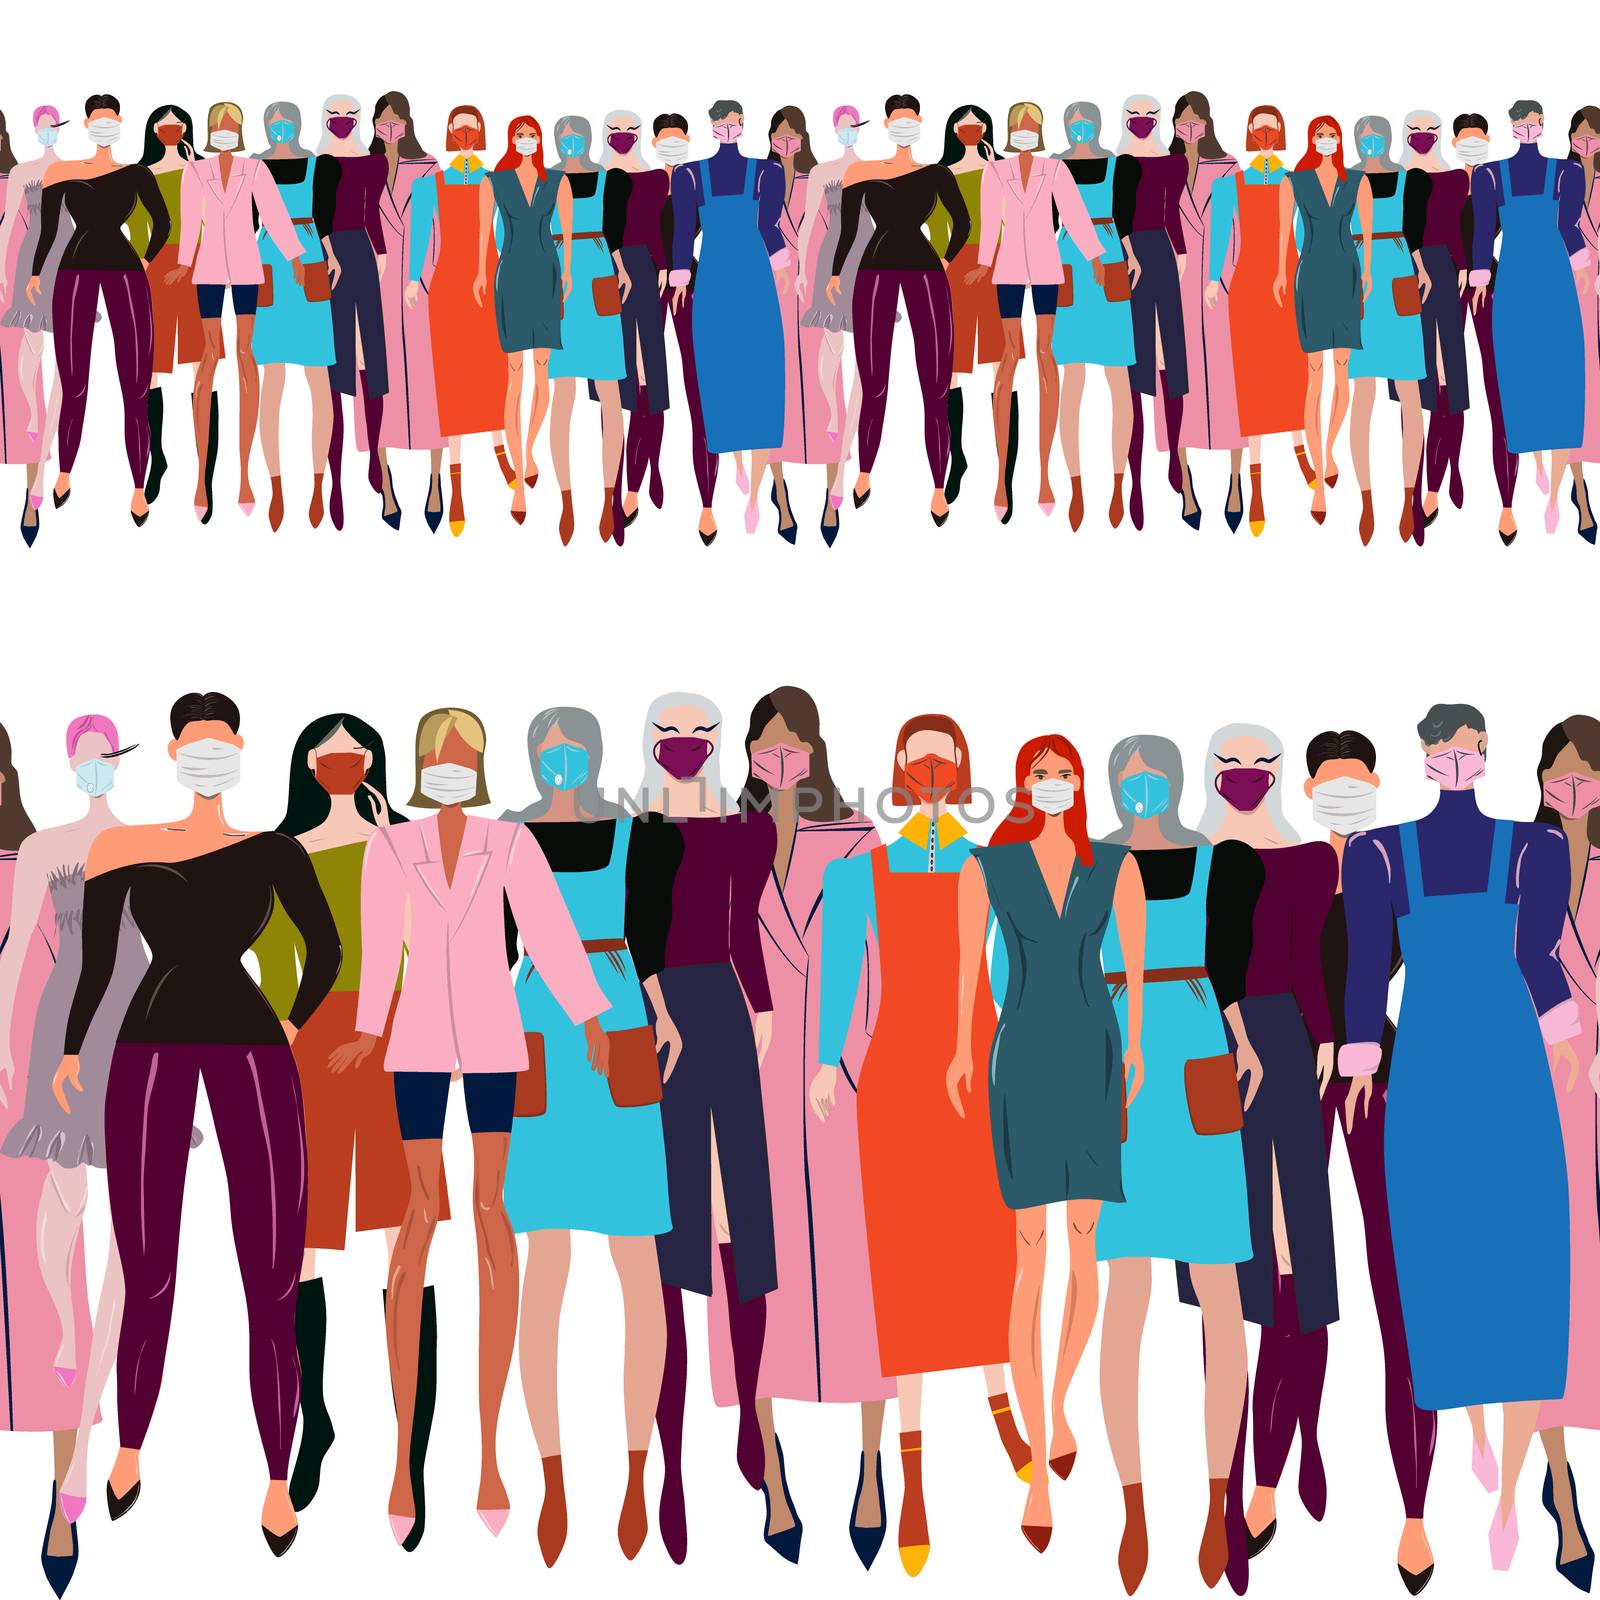 Endless border with multinational crowd wearing protective face mask. Latest trend news, fashion bloggers post. Flat cartoon illustration with copyspace on white background. Vector illustration.